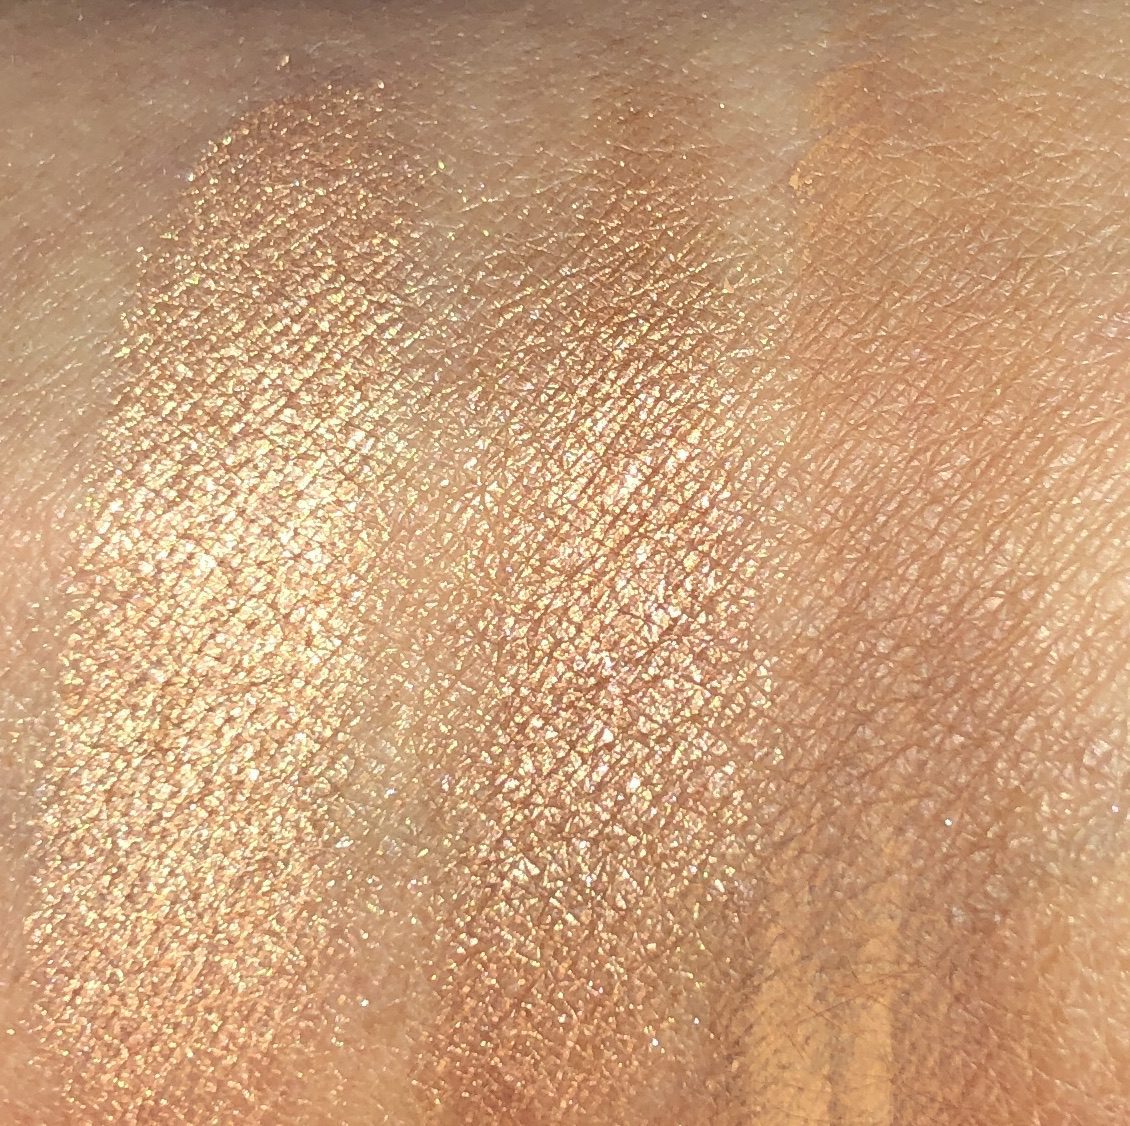 SWATCHES HAPPY GLOW SHADES 1, 2, AND 3